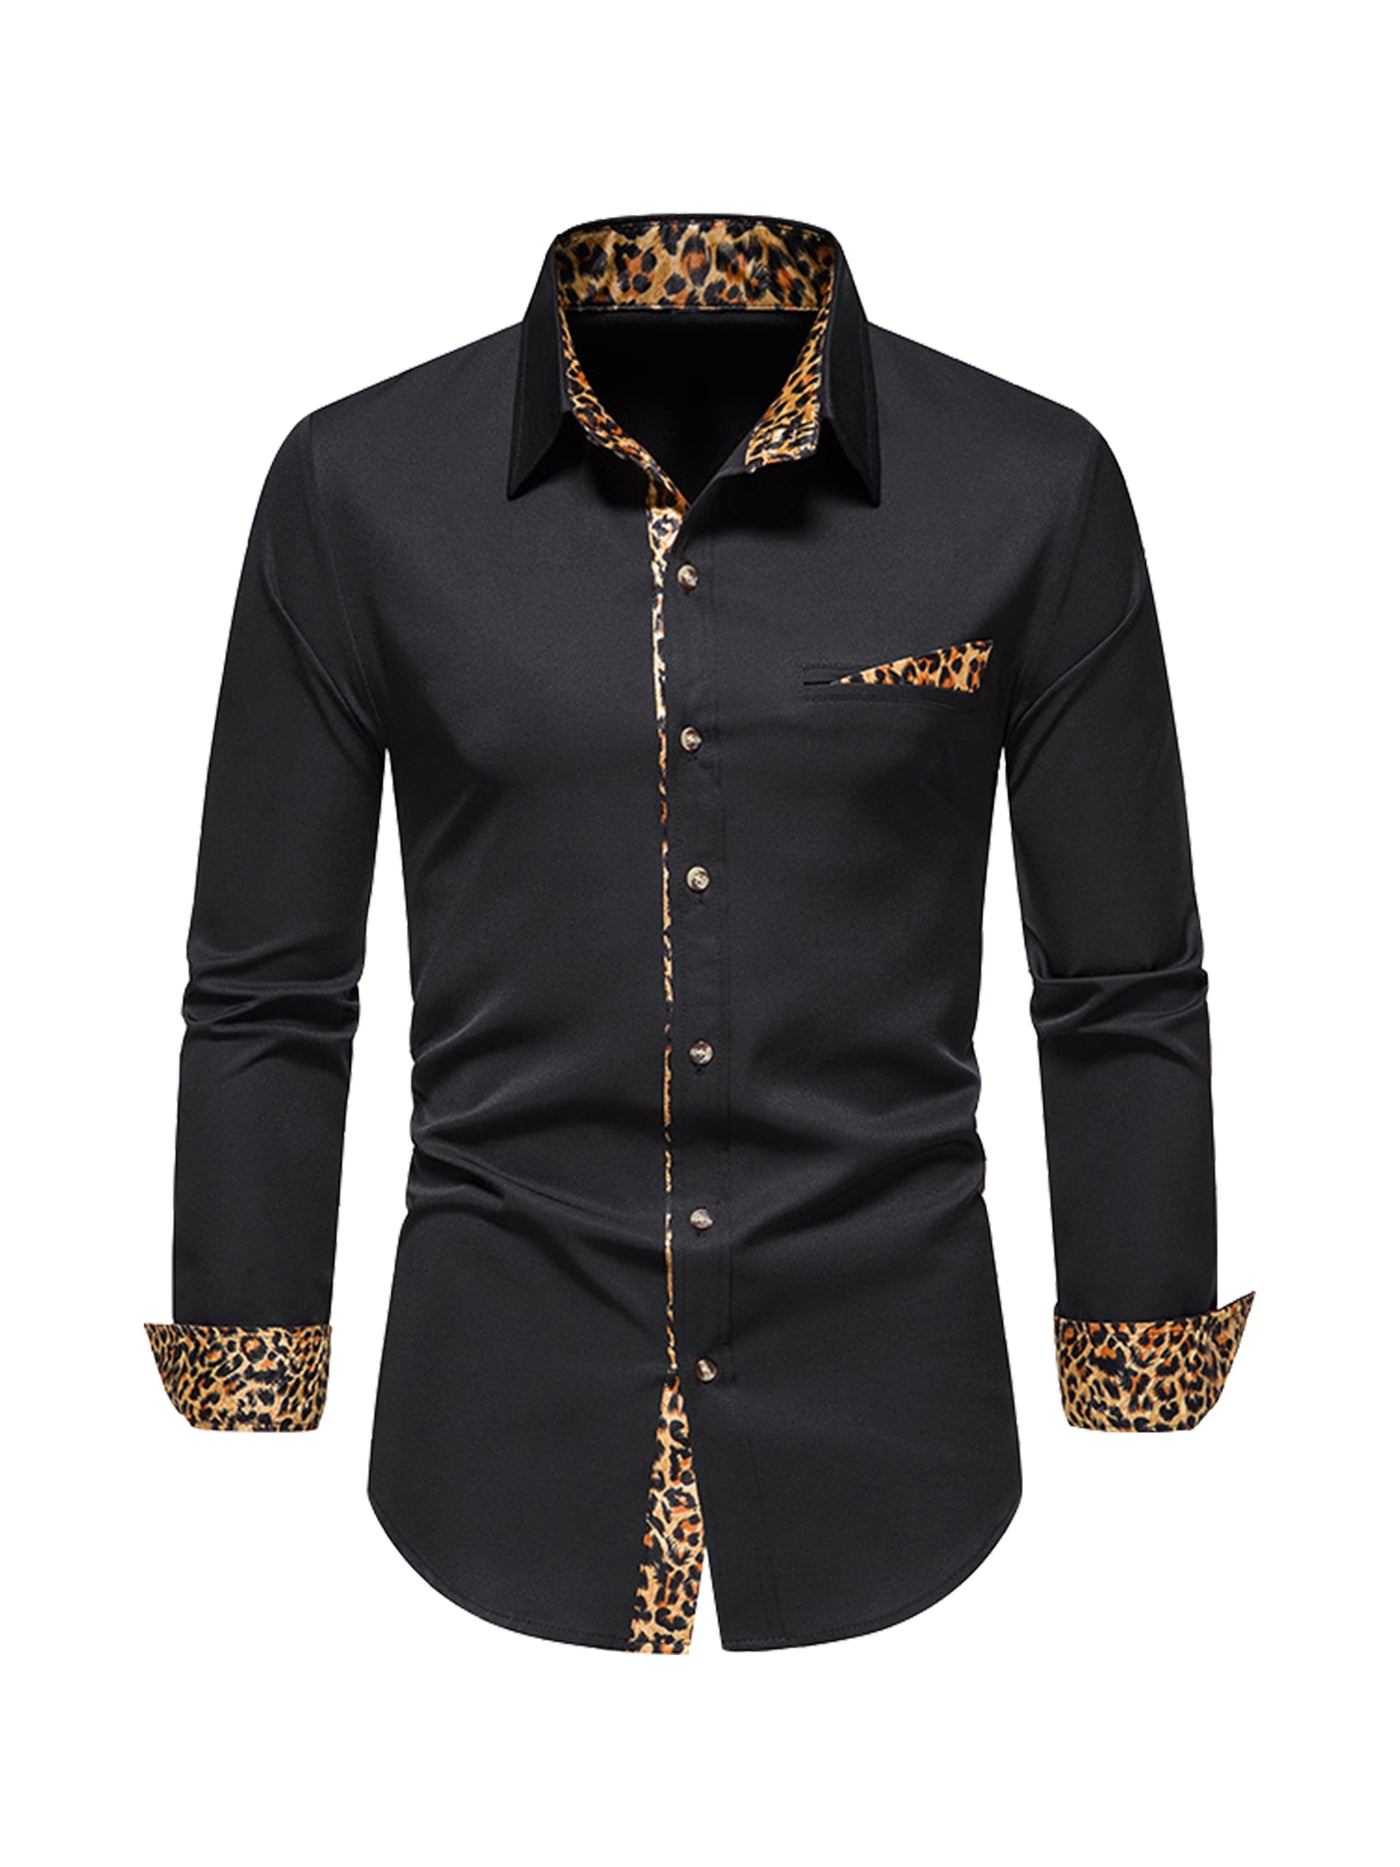 Bublédon Men's Long Sleeves Button Down Constrast Leopard Printed Party Dress Shirts